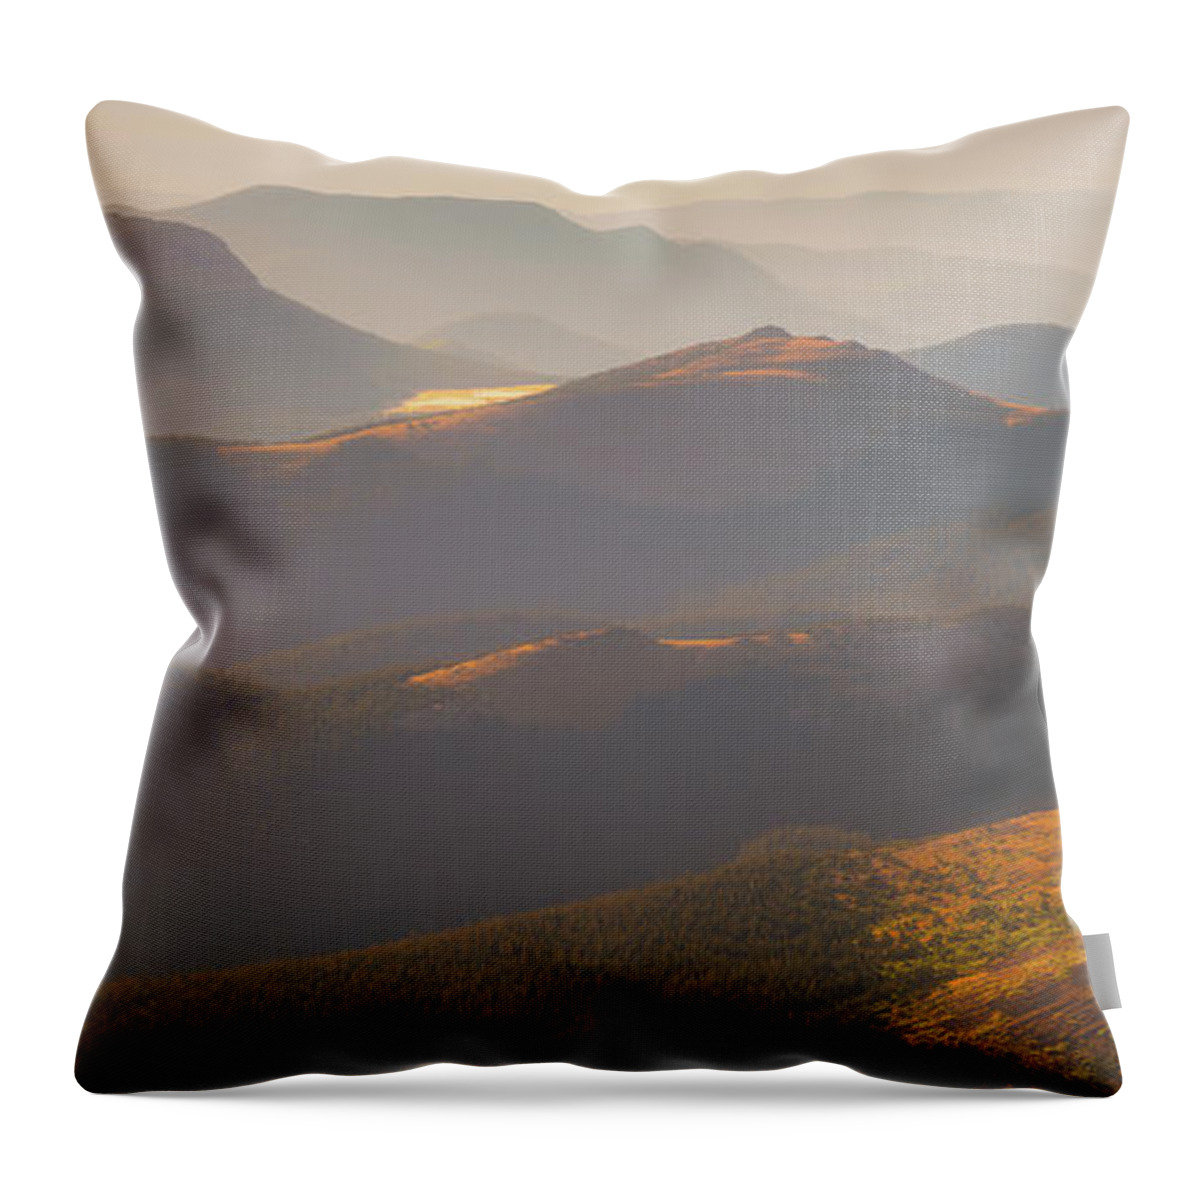 Layers Throw Pillow featuring the photograph Warm Earth by Darren White